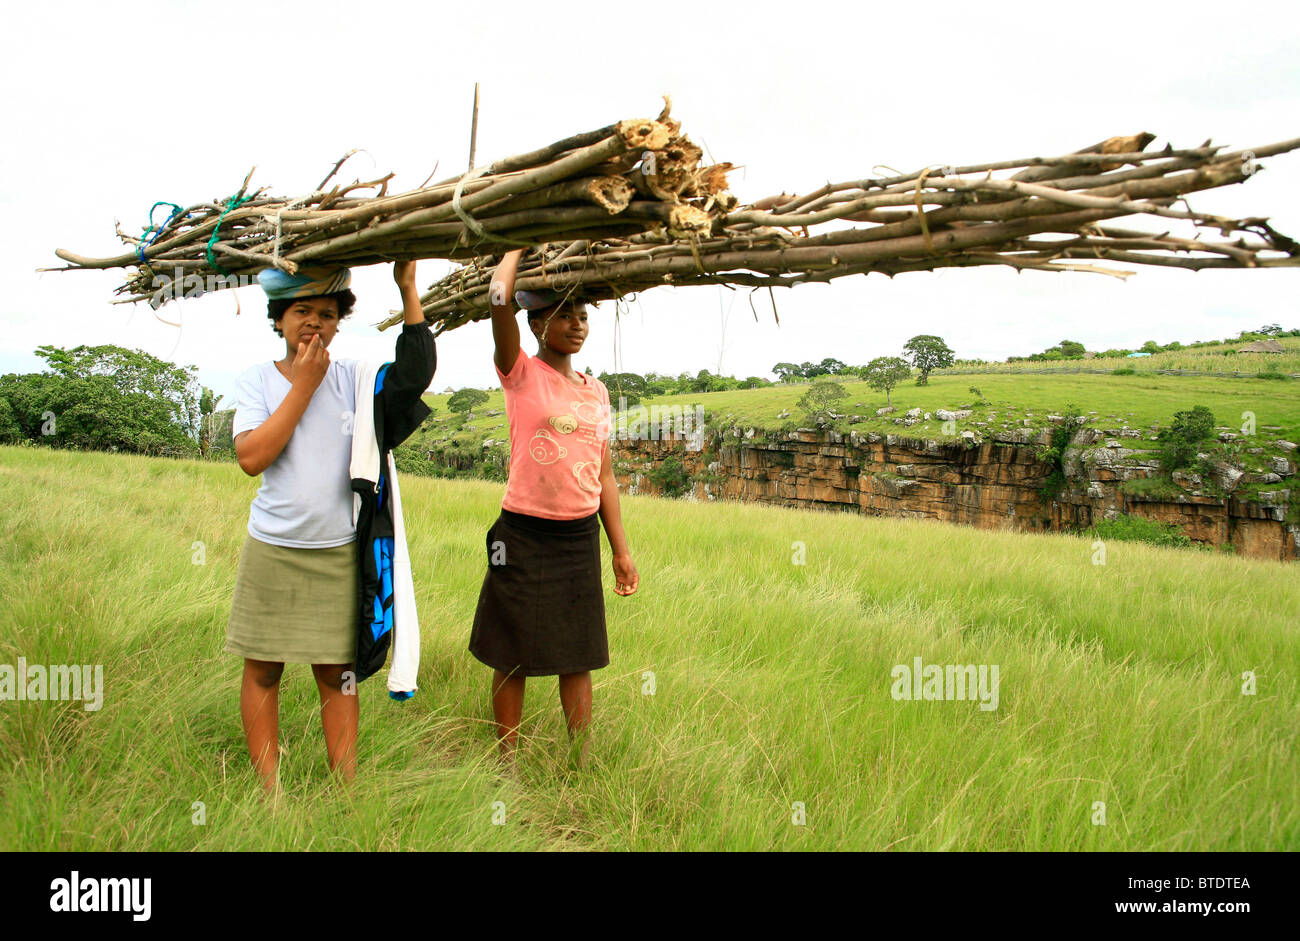 Two black women carry long bundles of wood on their heads Stock Photo